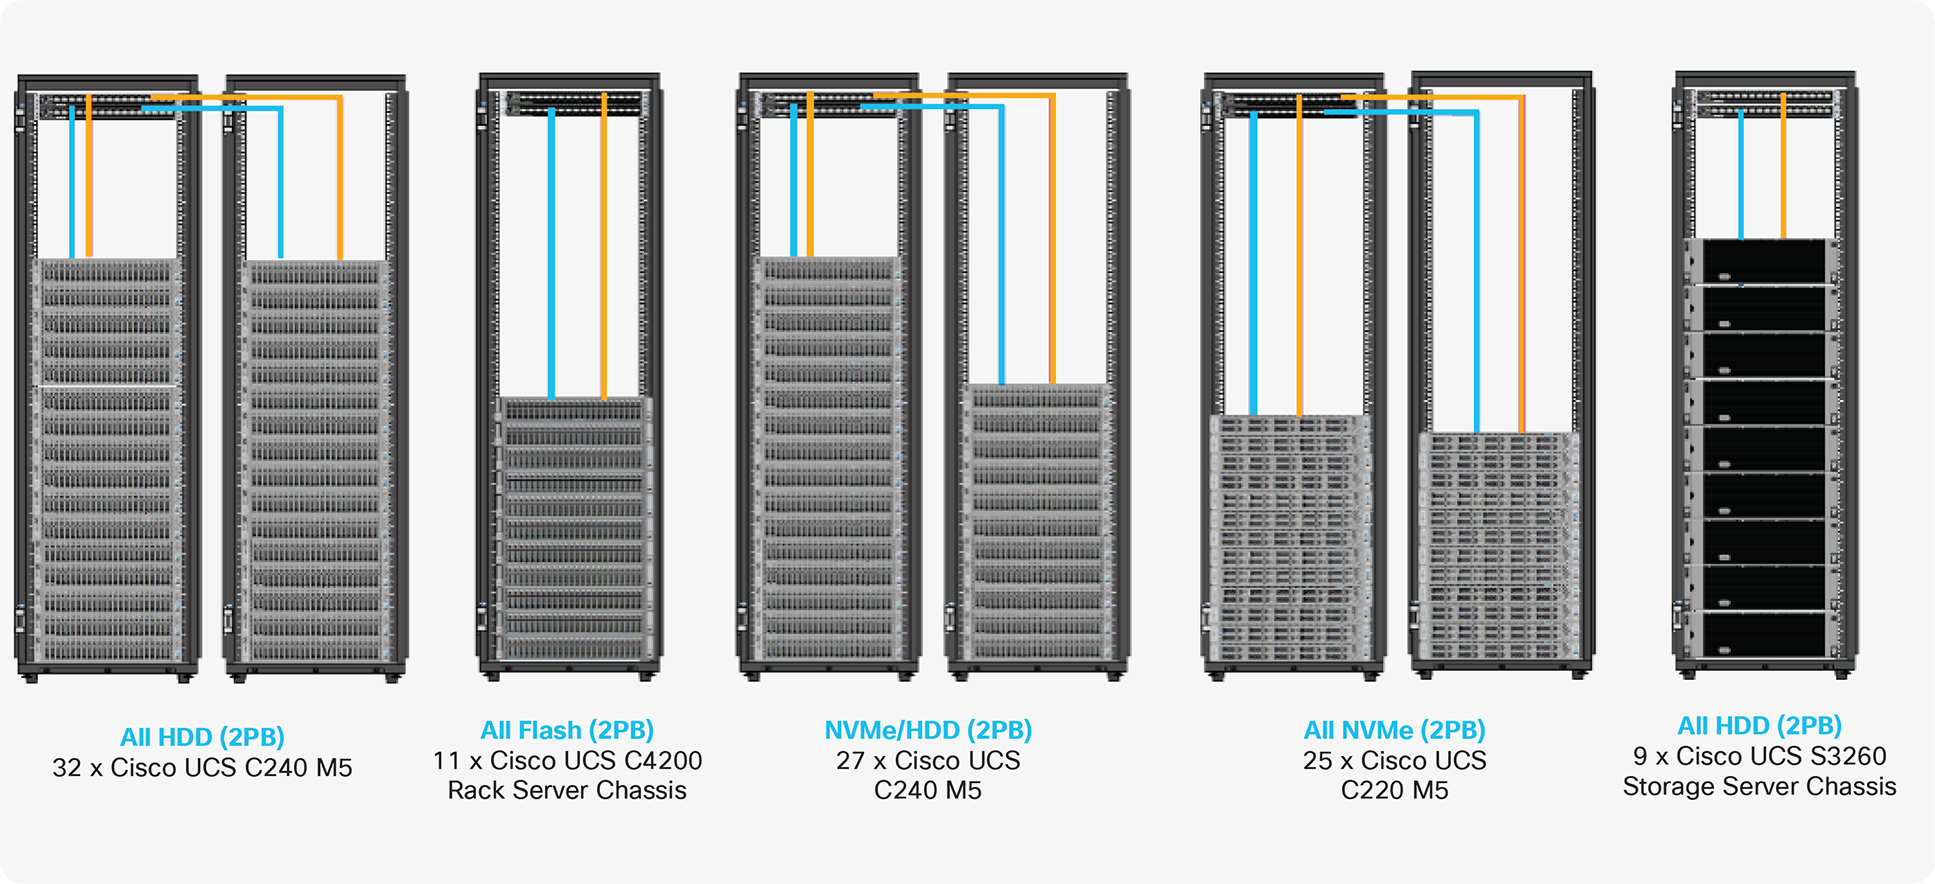 Cisco UCS Integrated Infrastructure for Big Data and Analytics – Modernize Hadoop